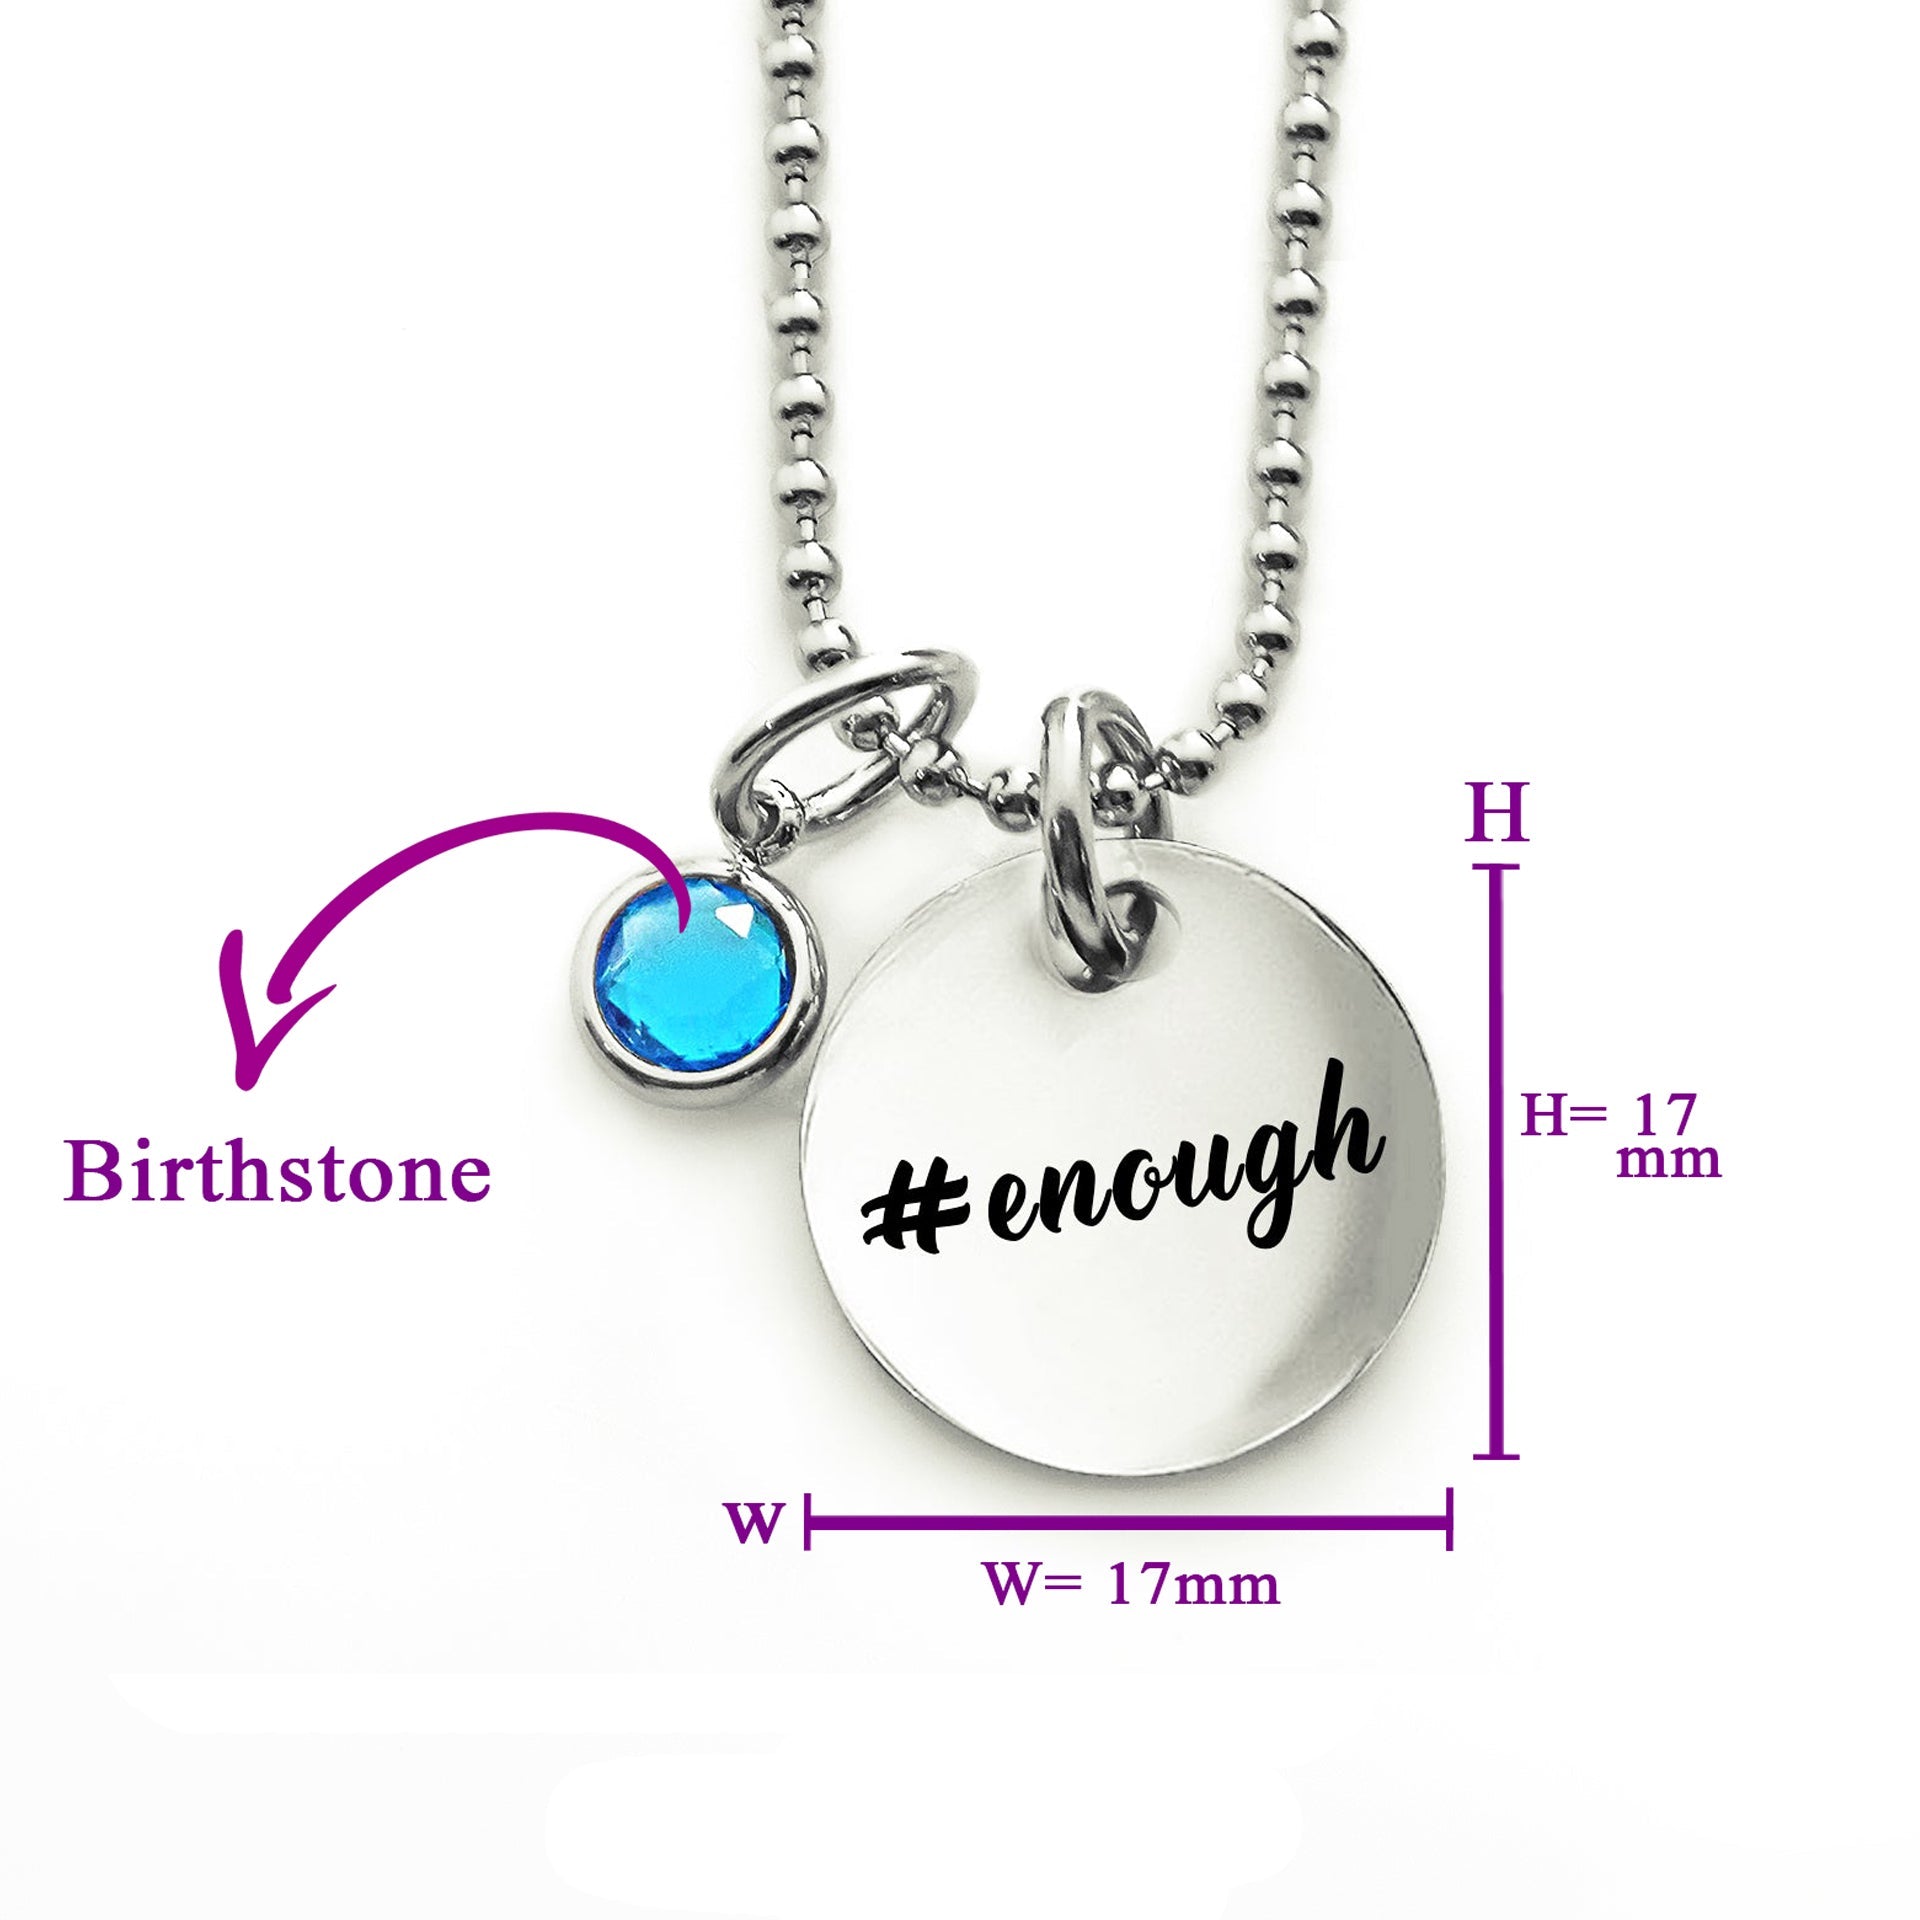 You are #Enough Necklace - ARTI by Belle Fever